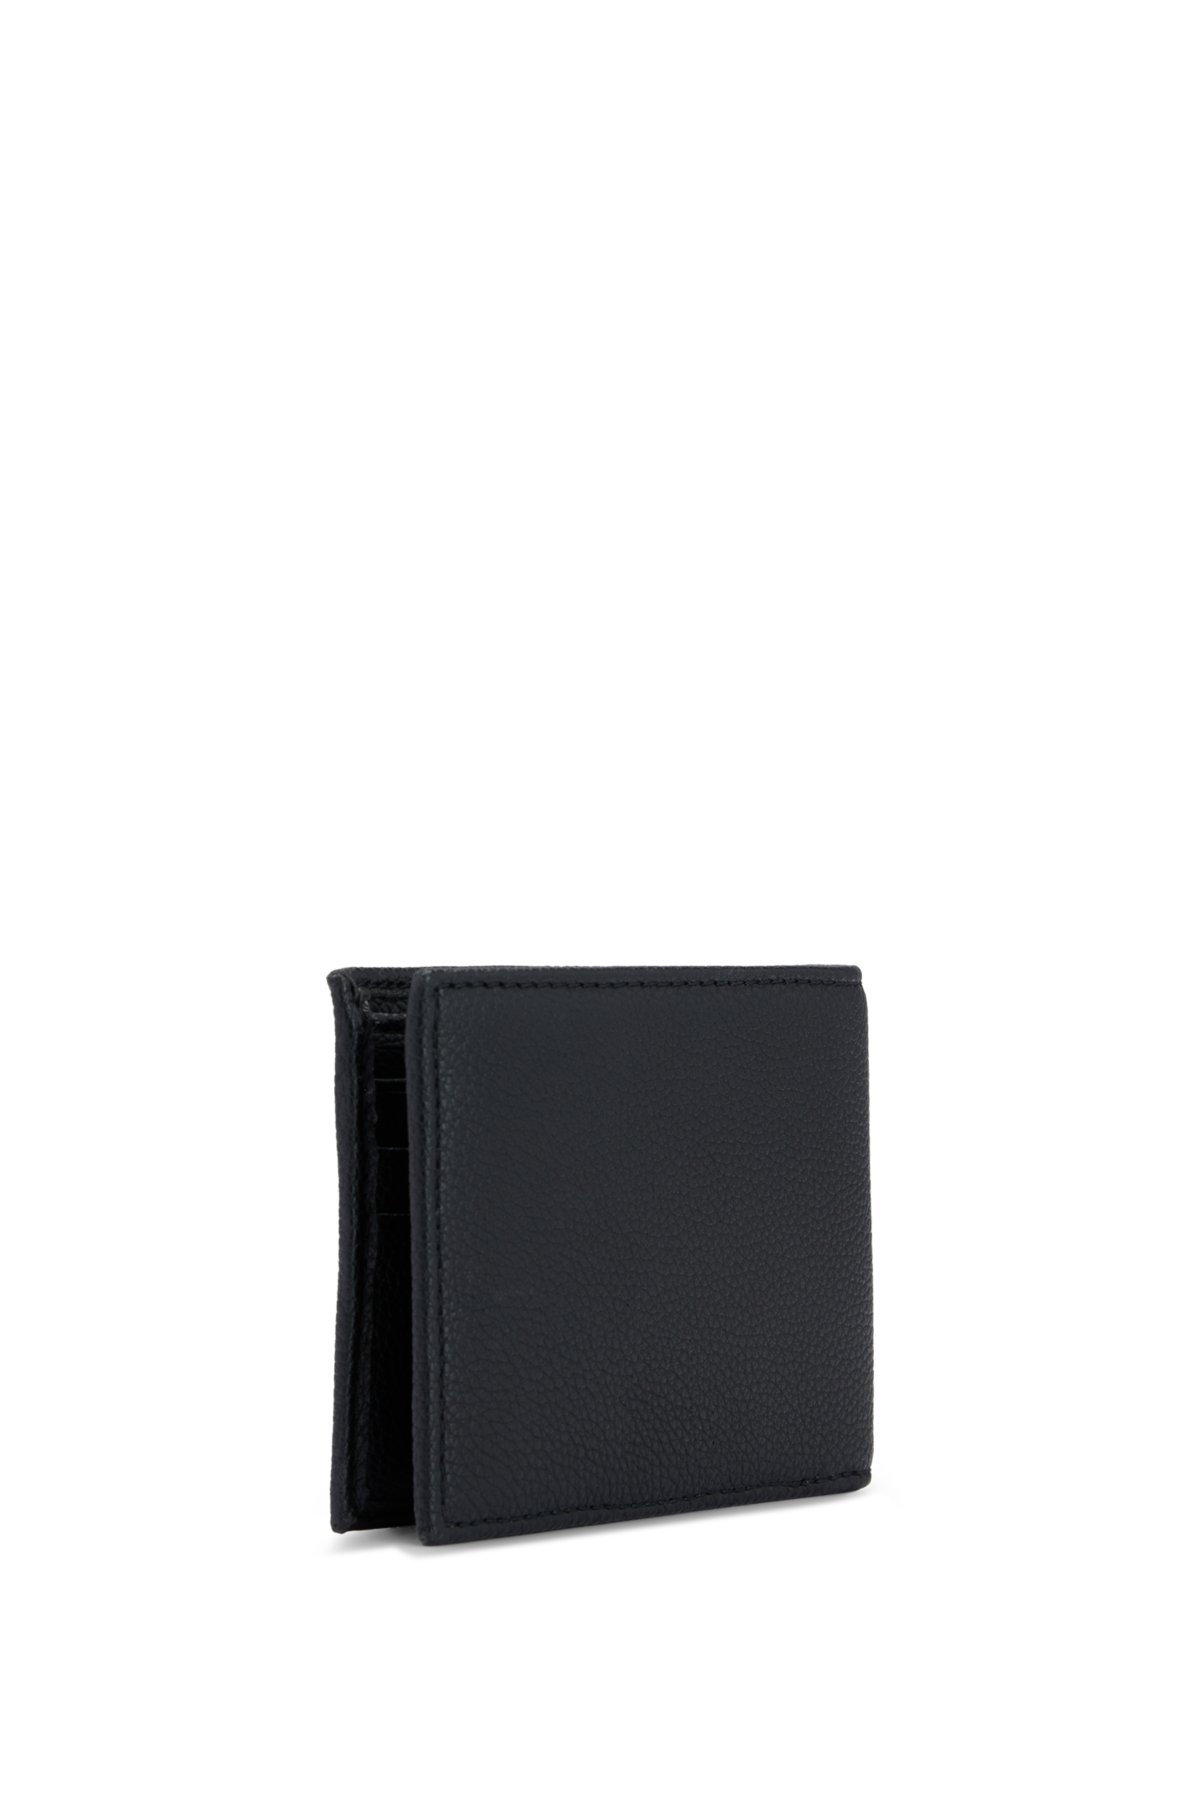 BOSS - Faux-leather billfold wallet with logo and signature stripe